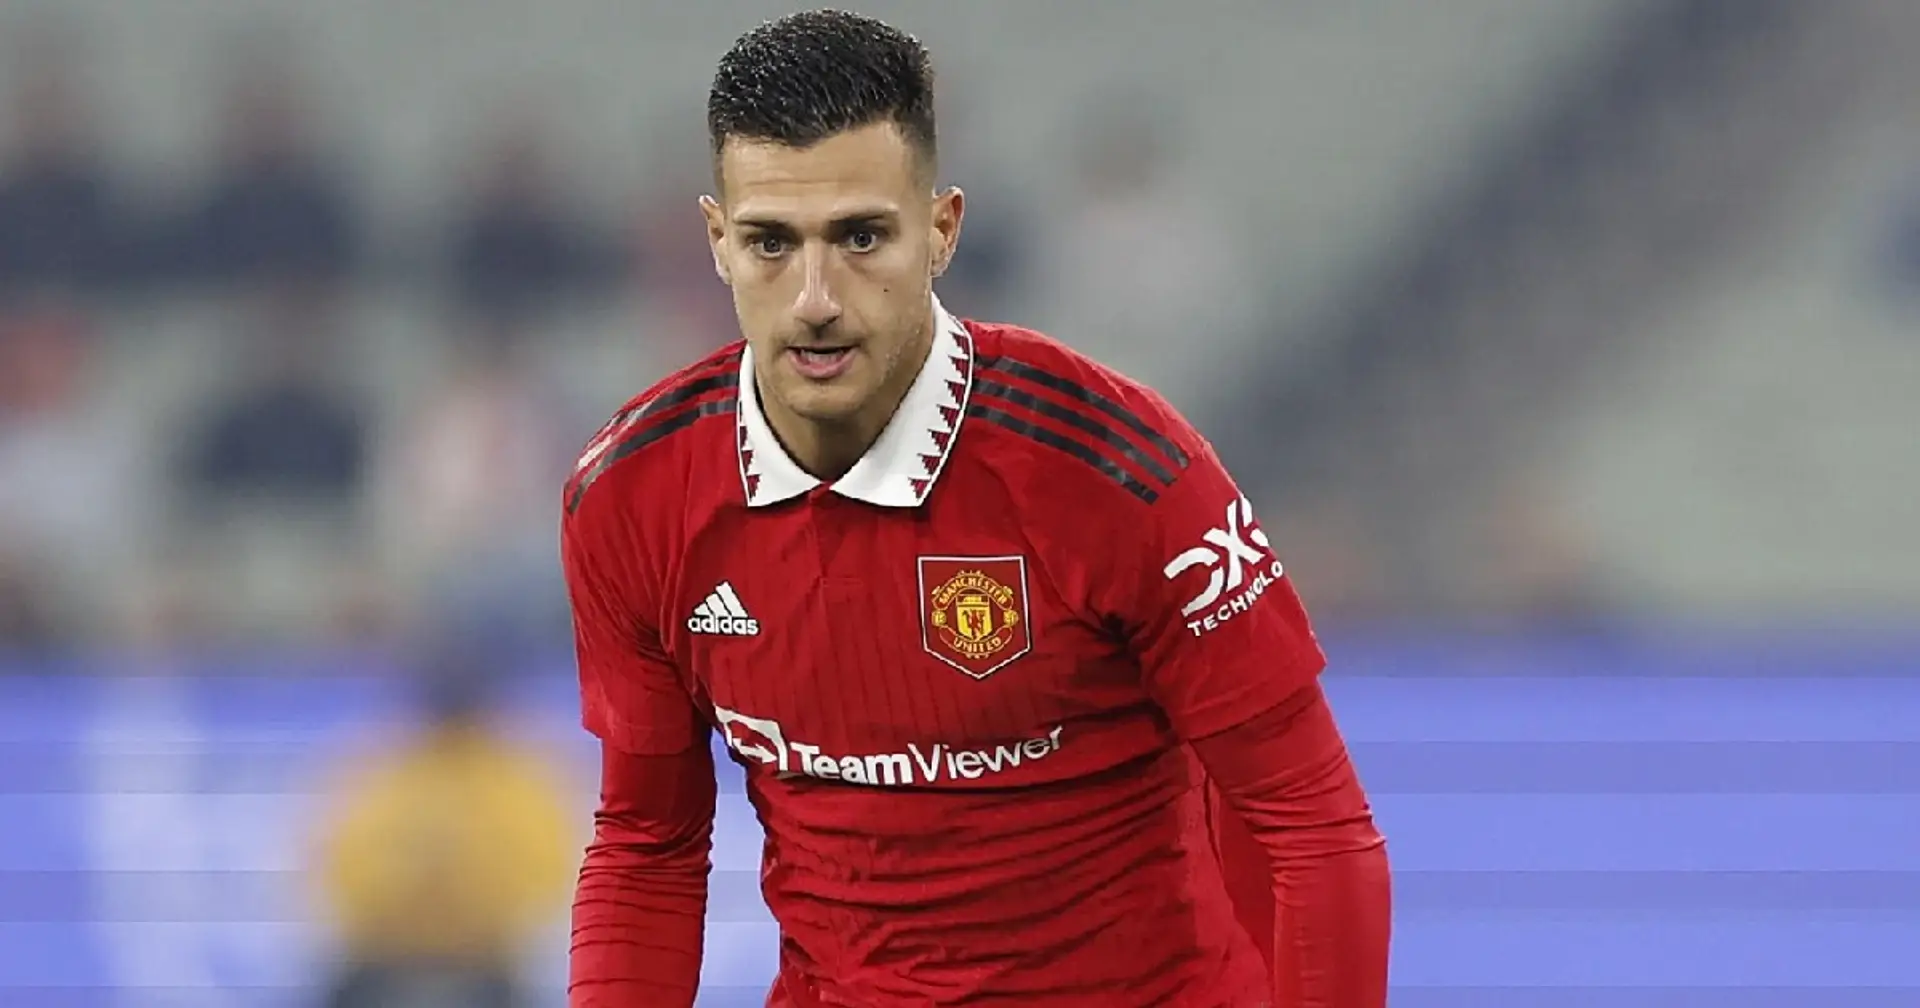 What do you think Diogo Dalot's best qualities are as a right-back?